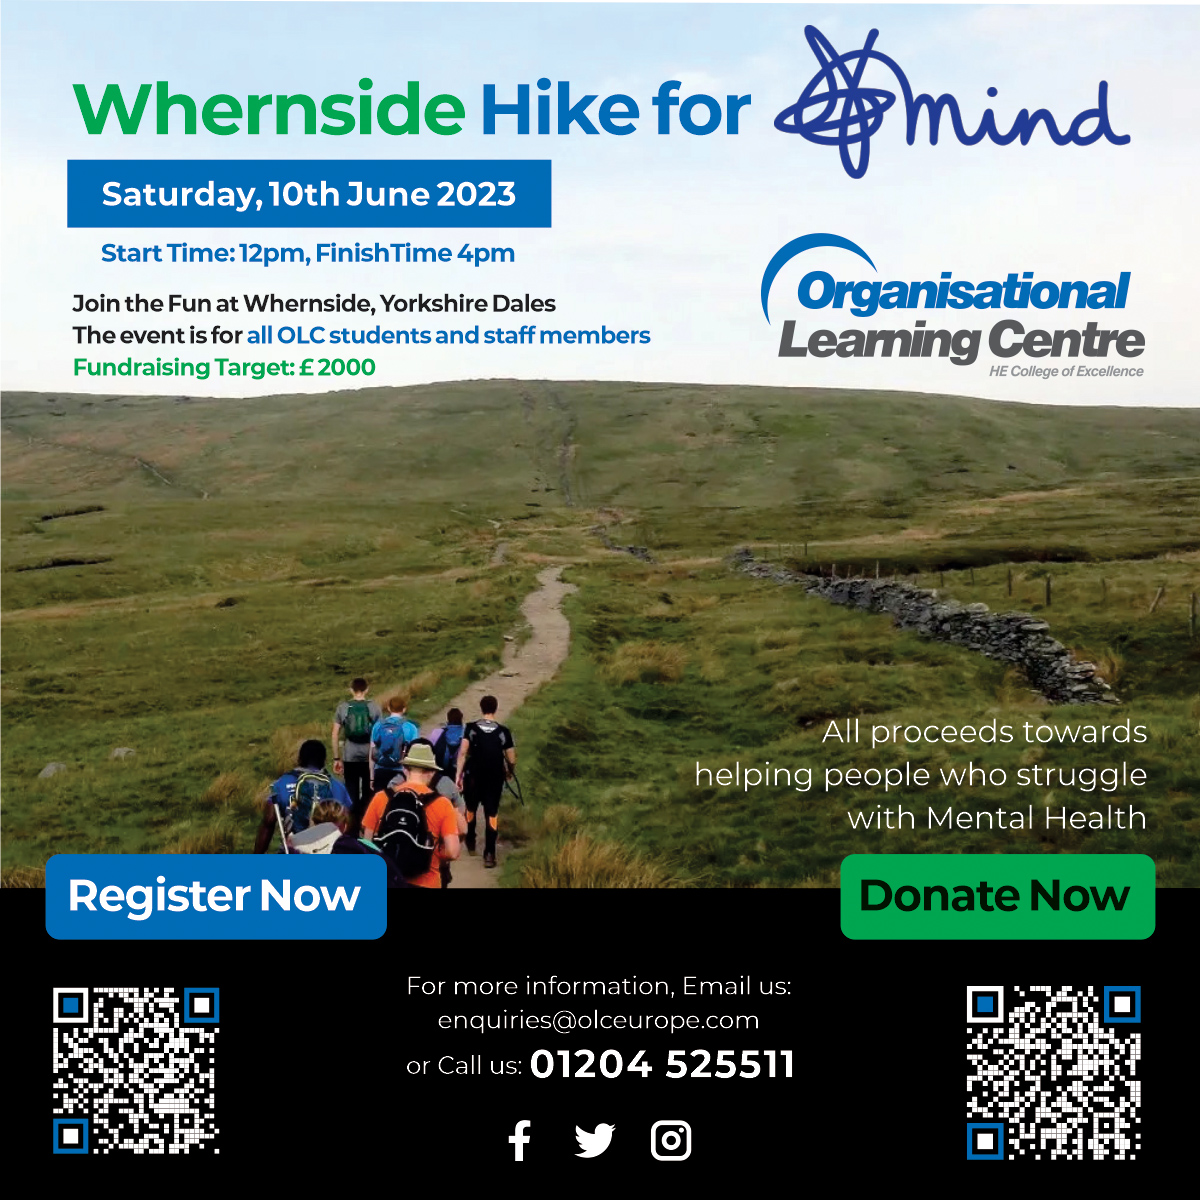 #OLC Students and staff will be #hiking up and down #Whernside, the highest point in Yorkshire, located in the #Yorkshire #Dales to support a charity- Mind, which is dedicated to helping individuals with #mentalhealth issues.
Register your interest: olceurope.com/whernside-hike…